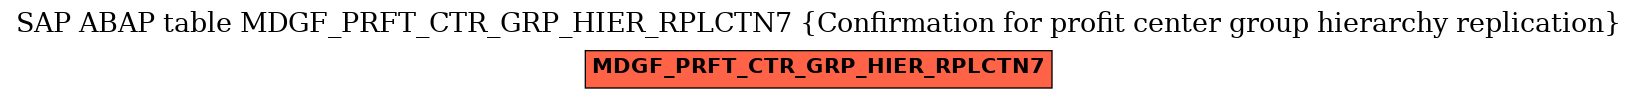 E-R Diagram for table MDGF_PRFT_CTR_GRP_HIER_RPLCTN7 (Confirmation for profit center group hierarchy replication)